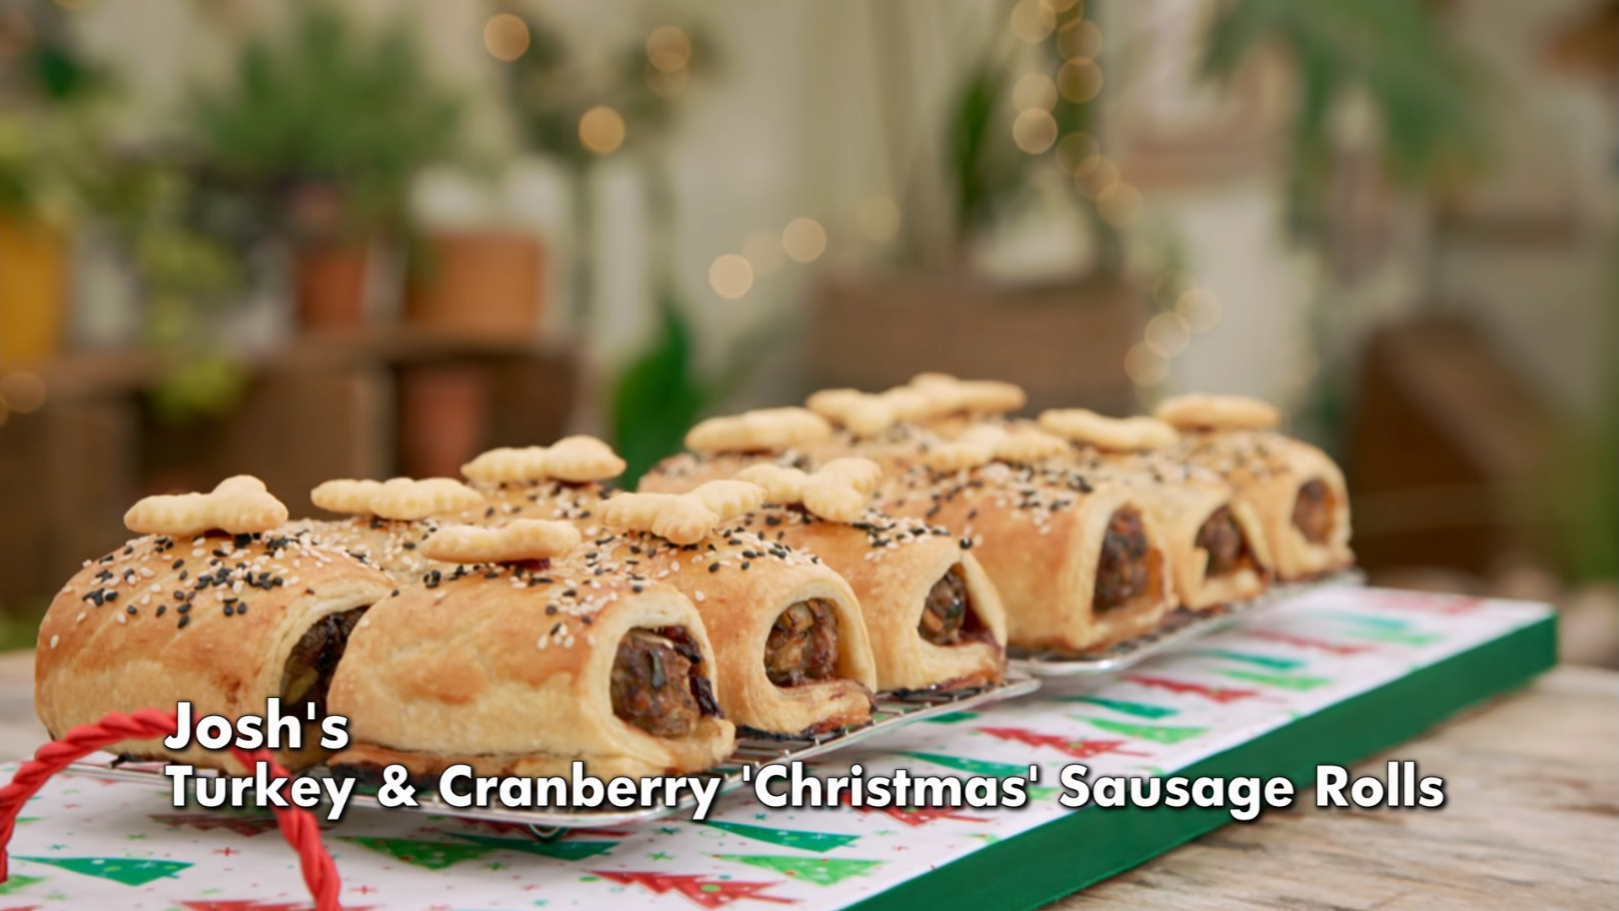 Josh's Turkey & Cranberry Christmas Sausage Rolls Signature from The Great British Baking Show Season 14's "Party Week"